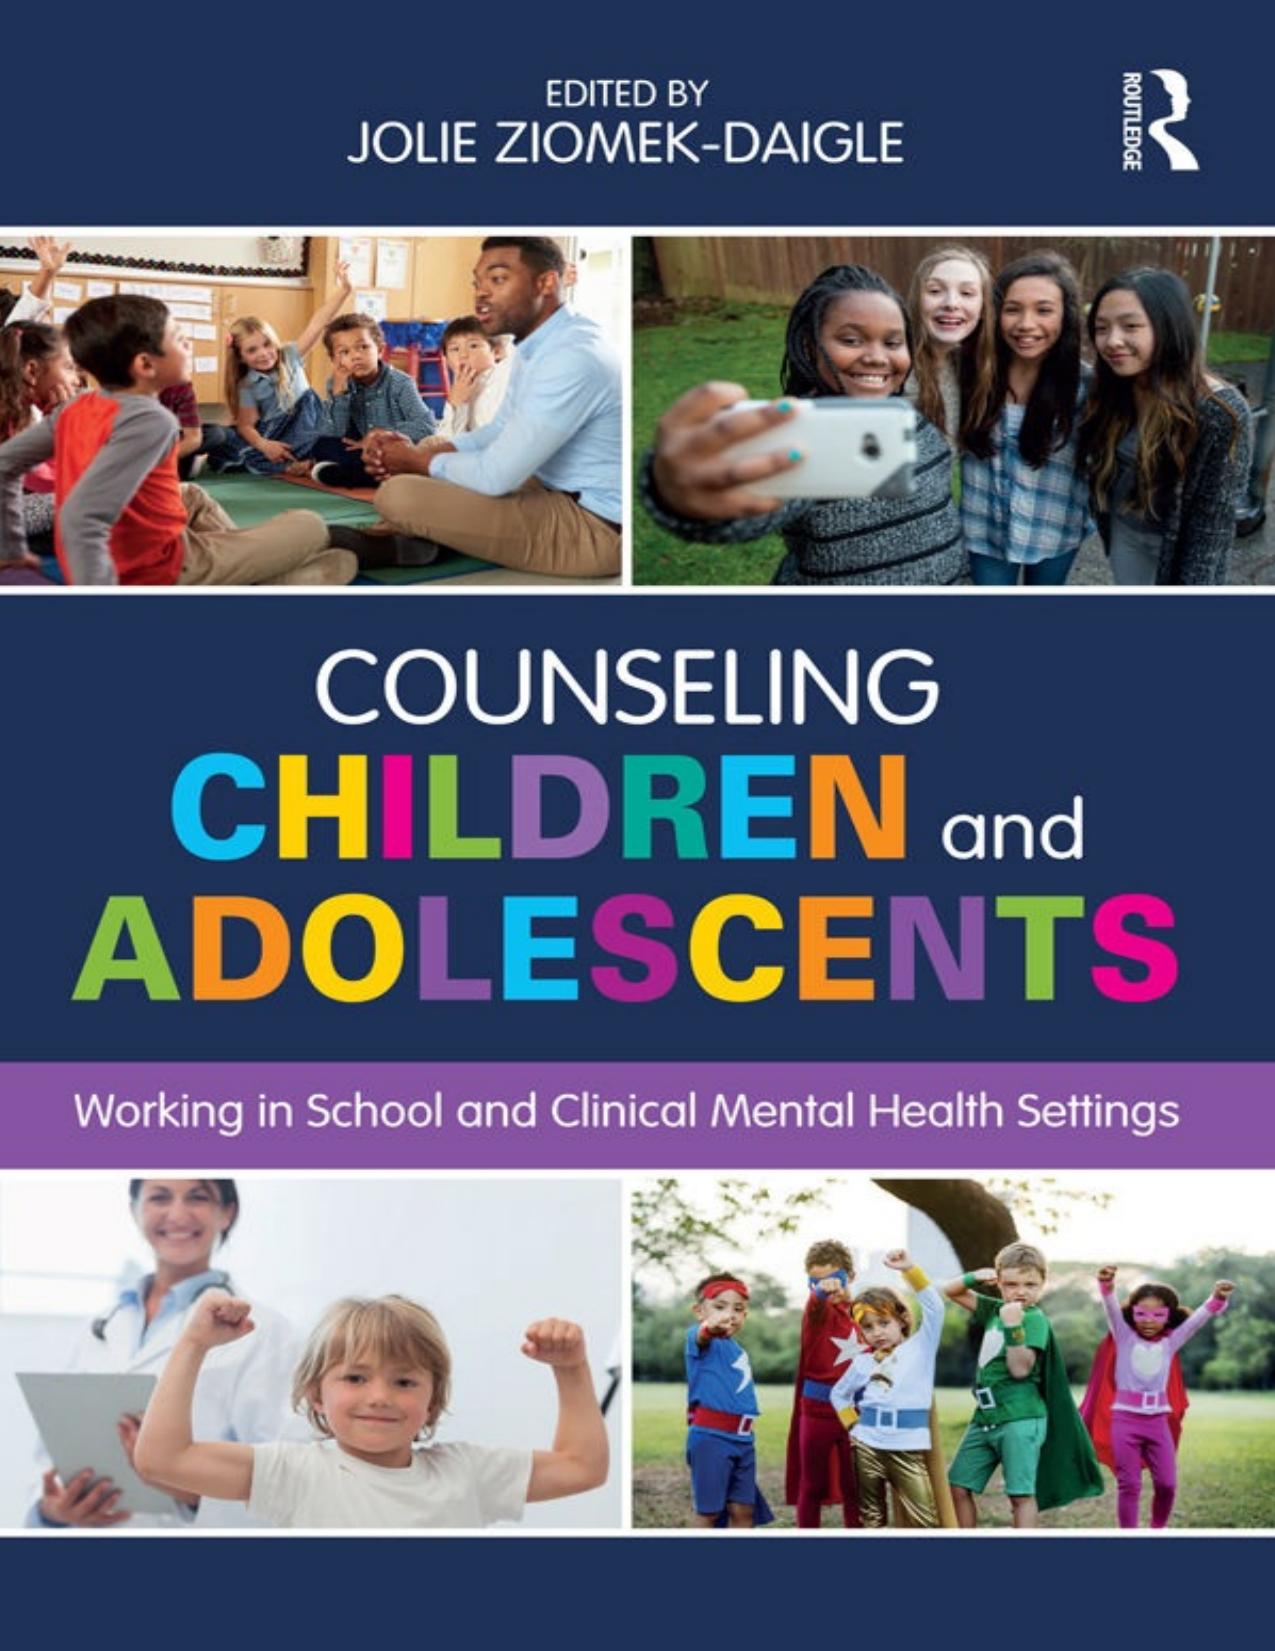 Counseling Children and Adolescents: Working in School and Clinical Mental Health Settings - PDFDrive.com